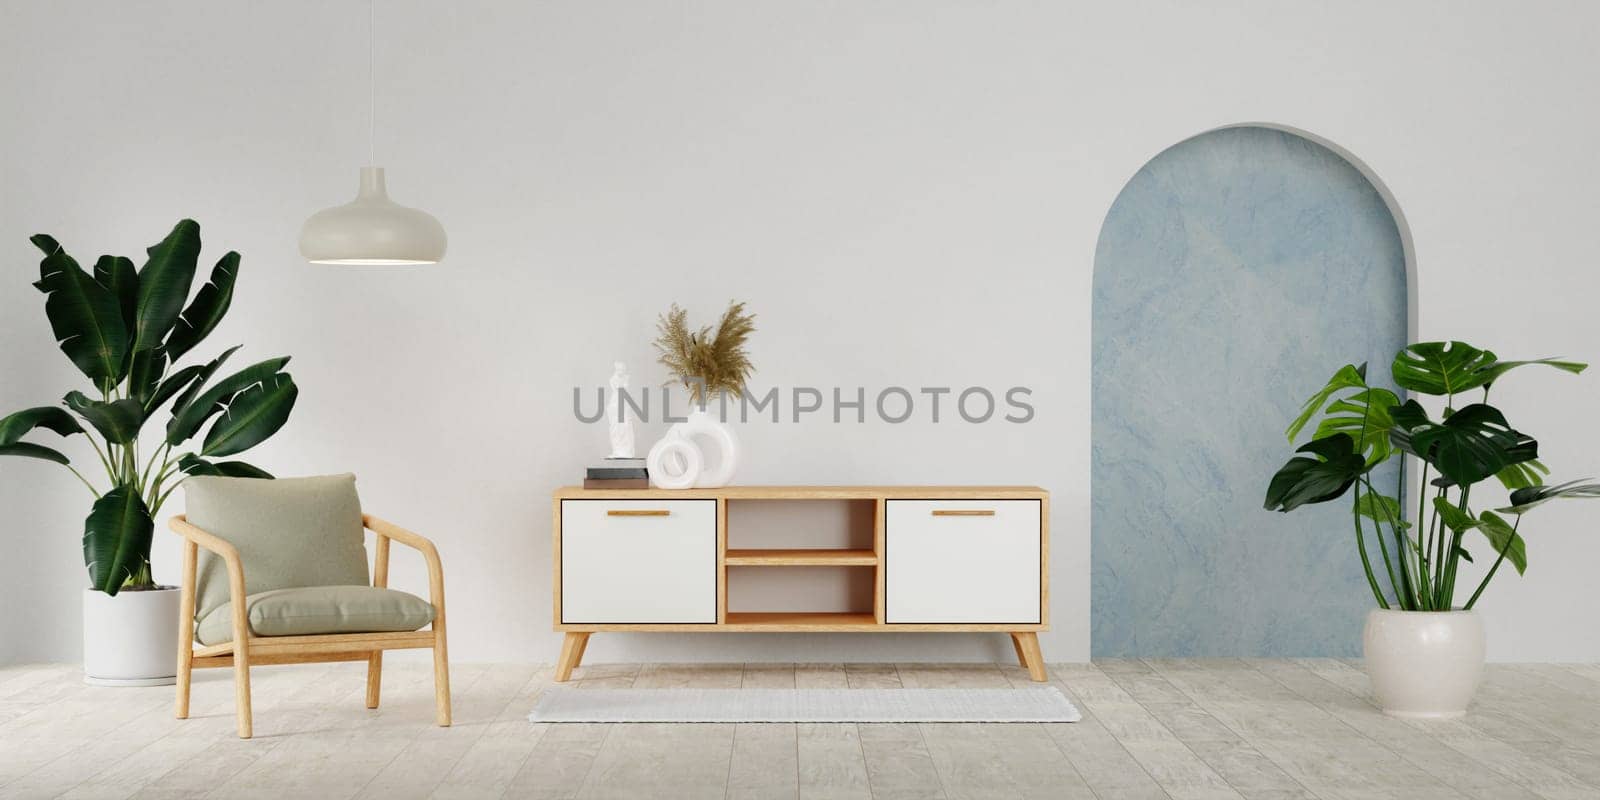 White minimalist living room interior with cabinet chair and plant on a wooden floor. Home Nordic interior. Scandinavian interior poster mock up. 3D render illustration by meepiangraphic